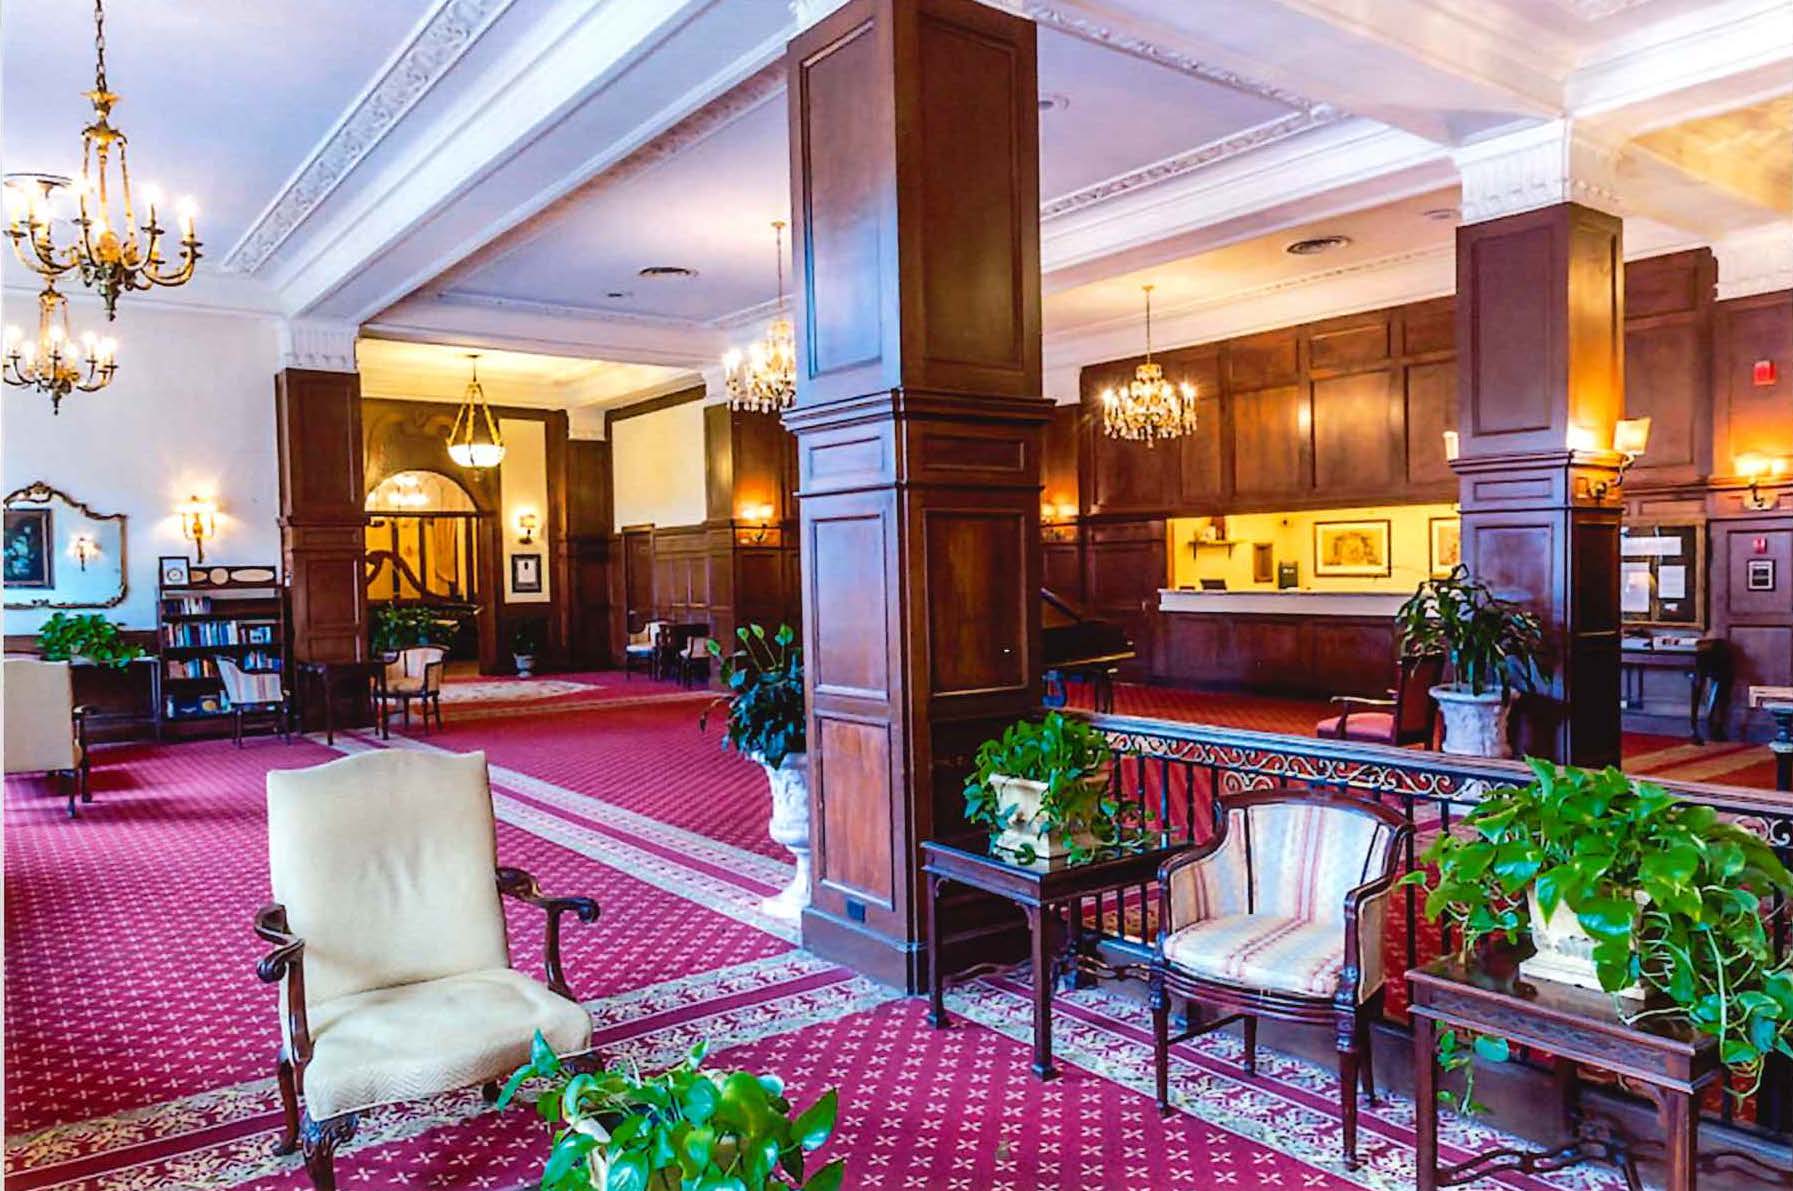 Hotel lobby with chairs, carpeting, and large columns.